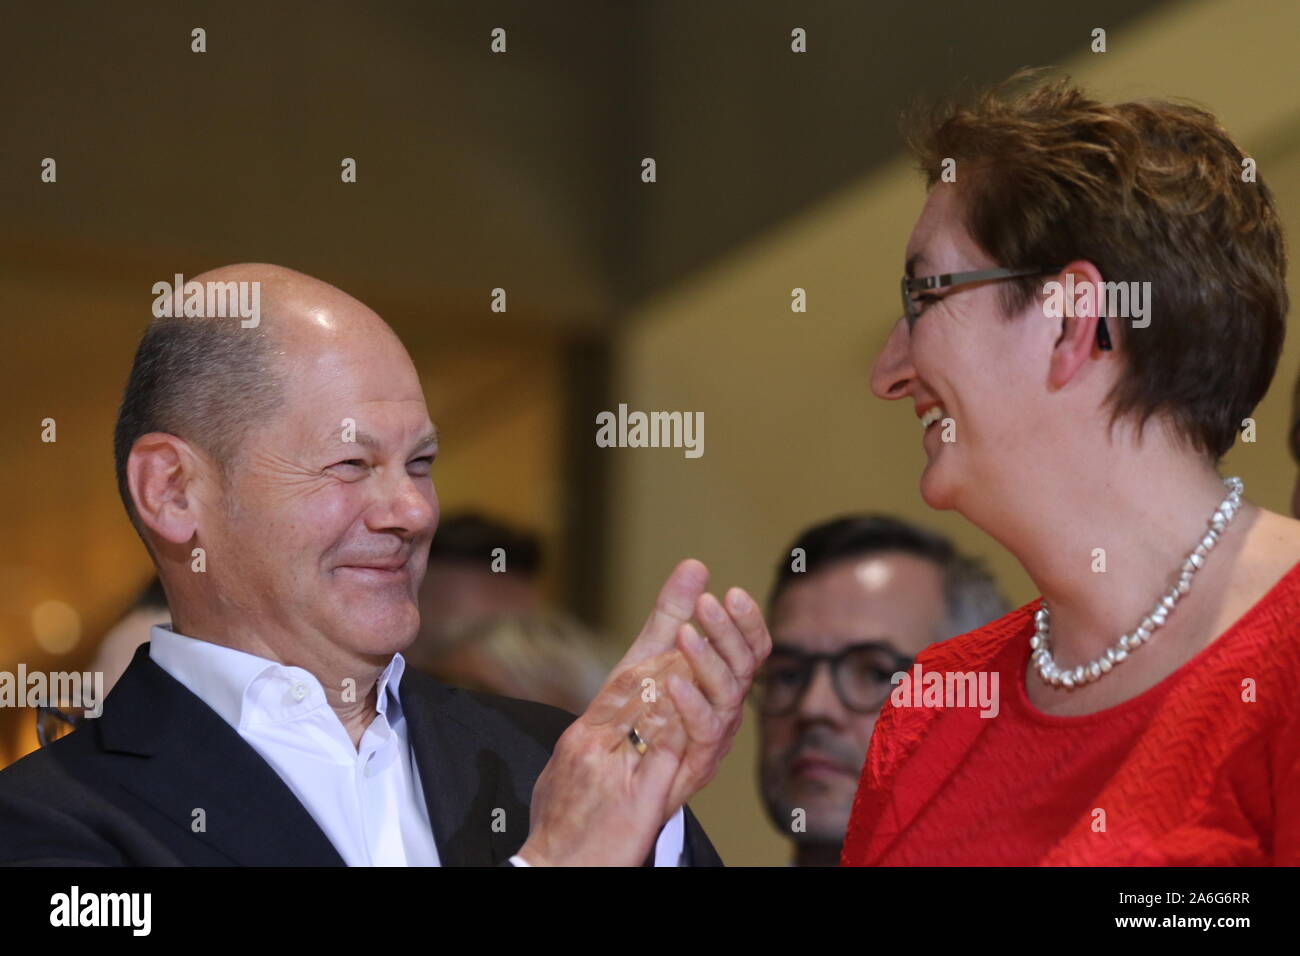 Germany, Berlin, 10/26/2019. Olaf Scholz and Klara Geywitz in the SPD headquarters in Berlin. The SPD members elect Federal Finance Minister Olaf Scholz and Klara Geywitz just ahead of Norbert Walter-Borjans and Saskia Esken for the SPD presidency. The race for the SPD presidency goes into the runoff election in November: the two candidates will then be elected at the party congress. Stock Photo